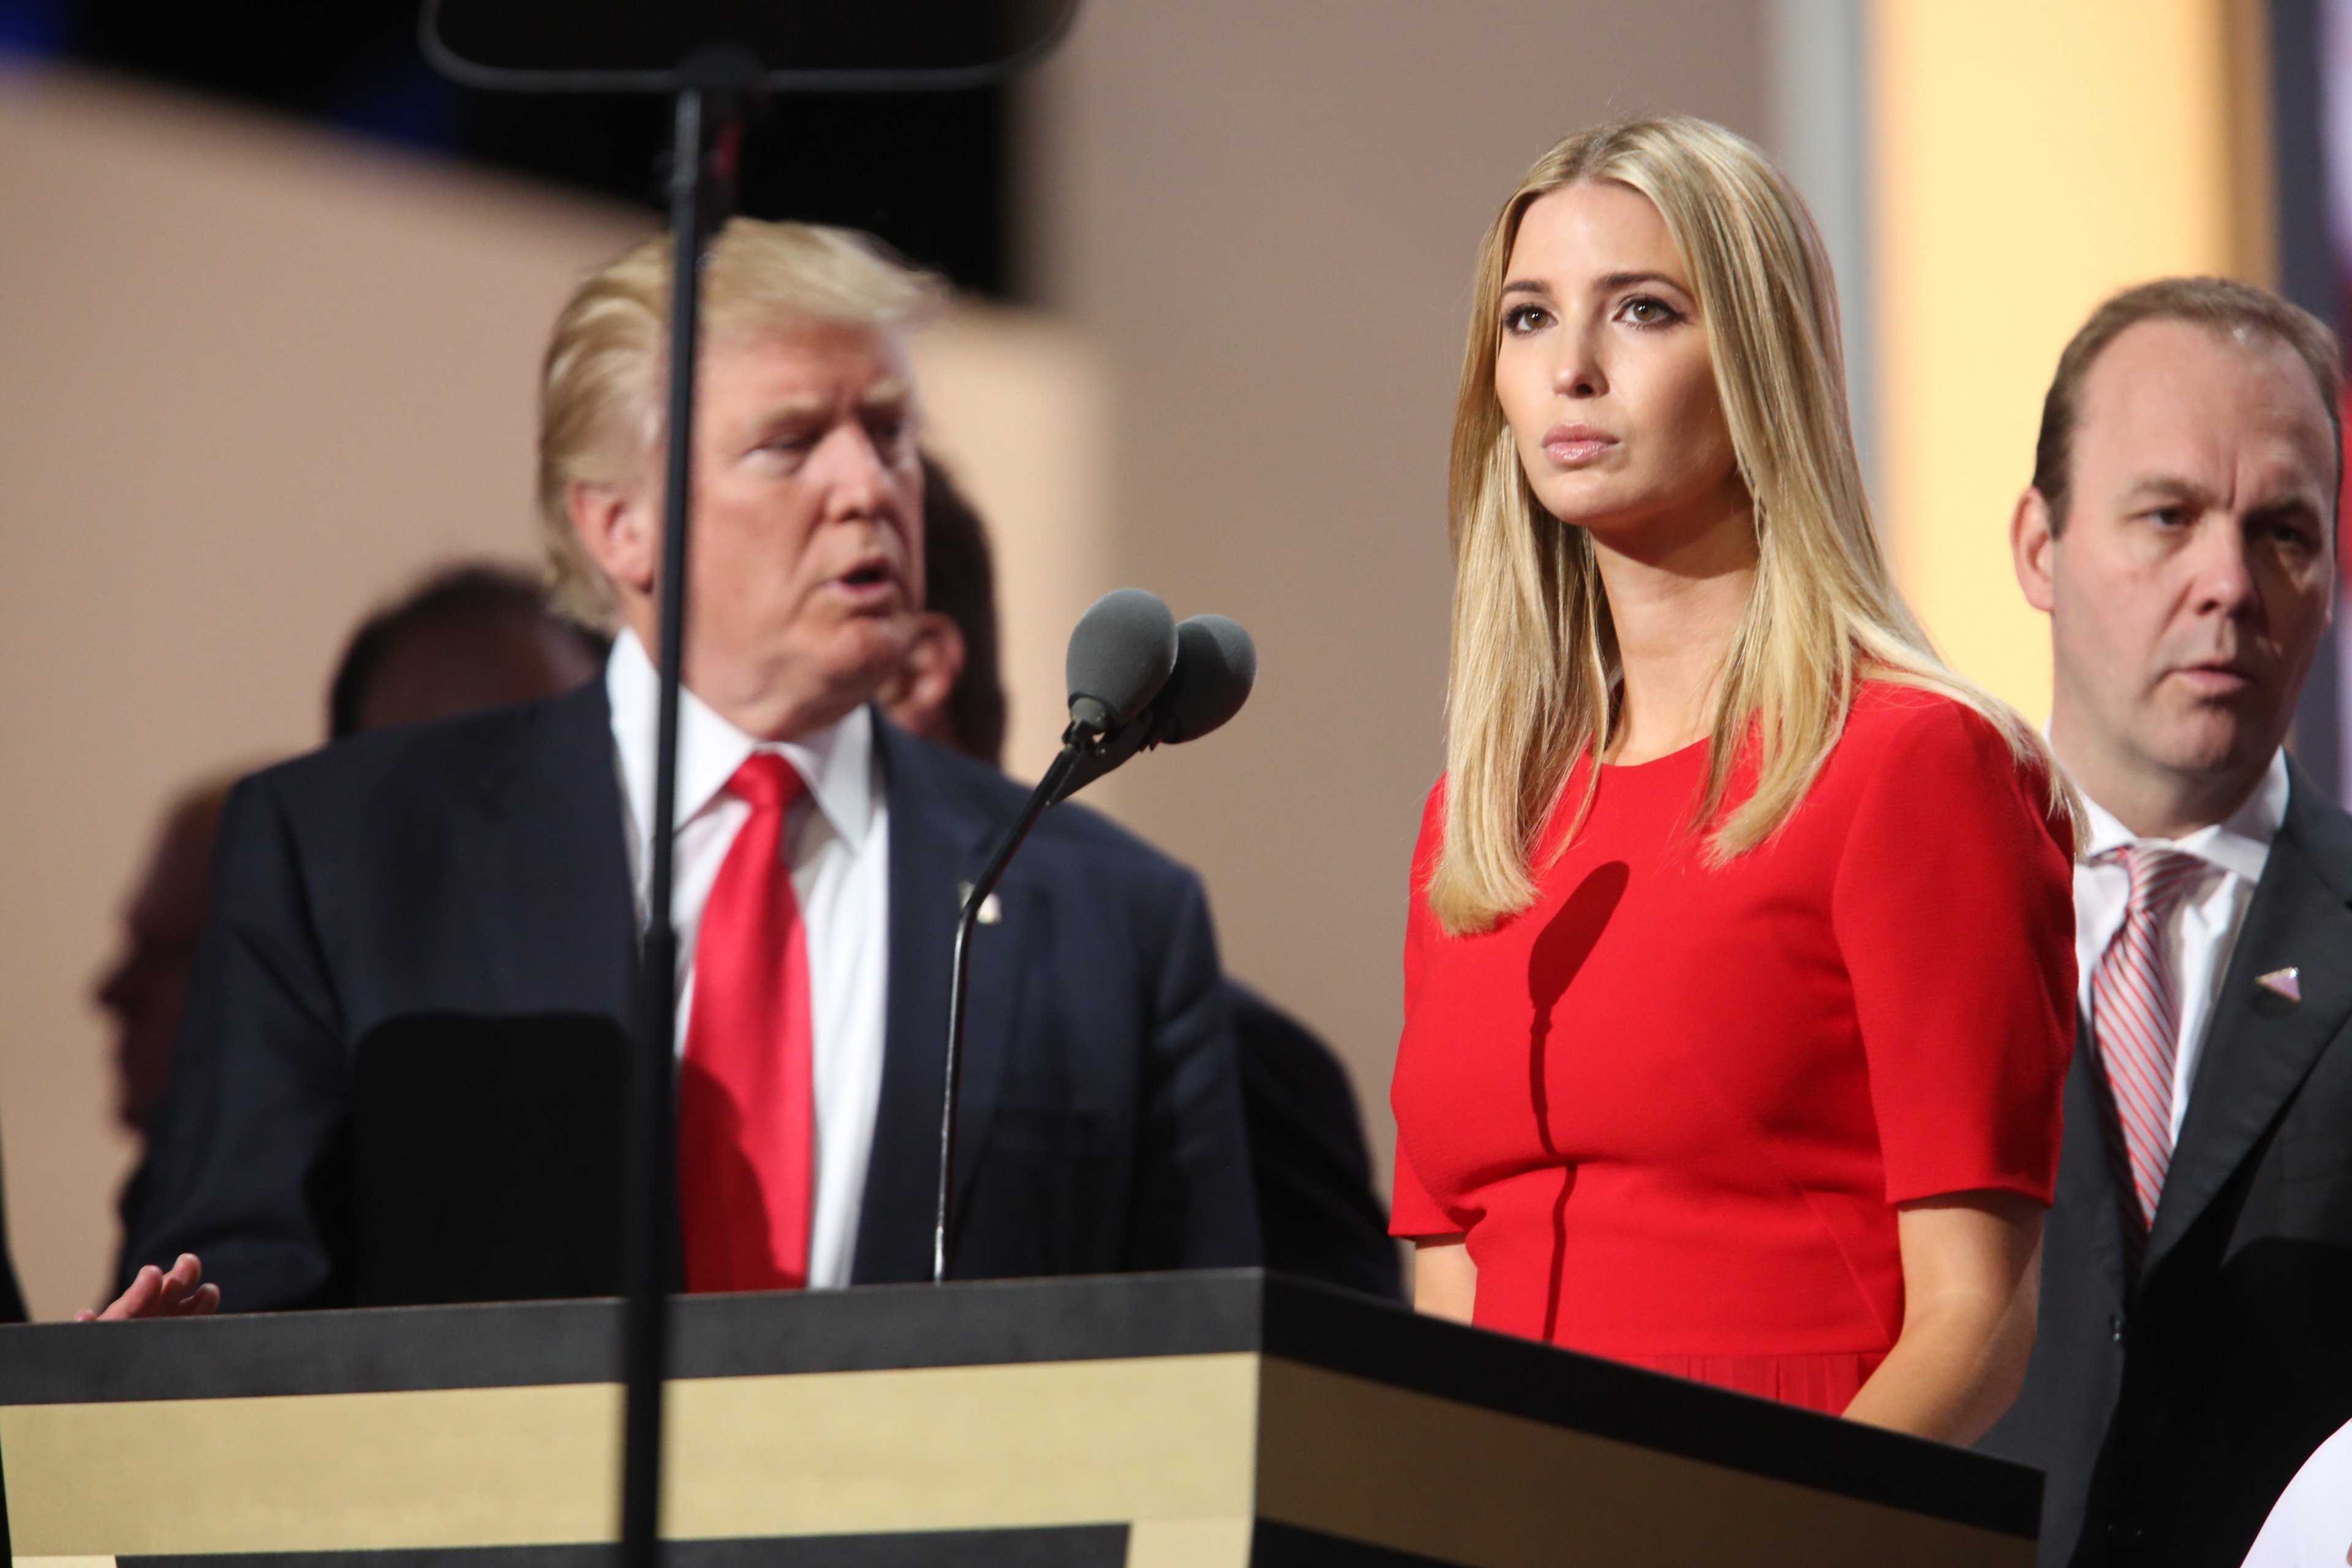 Ivanka Trump: 'Inappropriate' to ask her about father's accusers